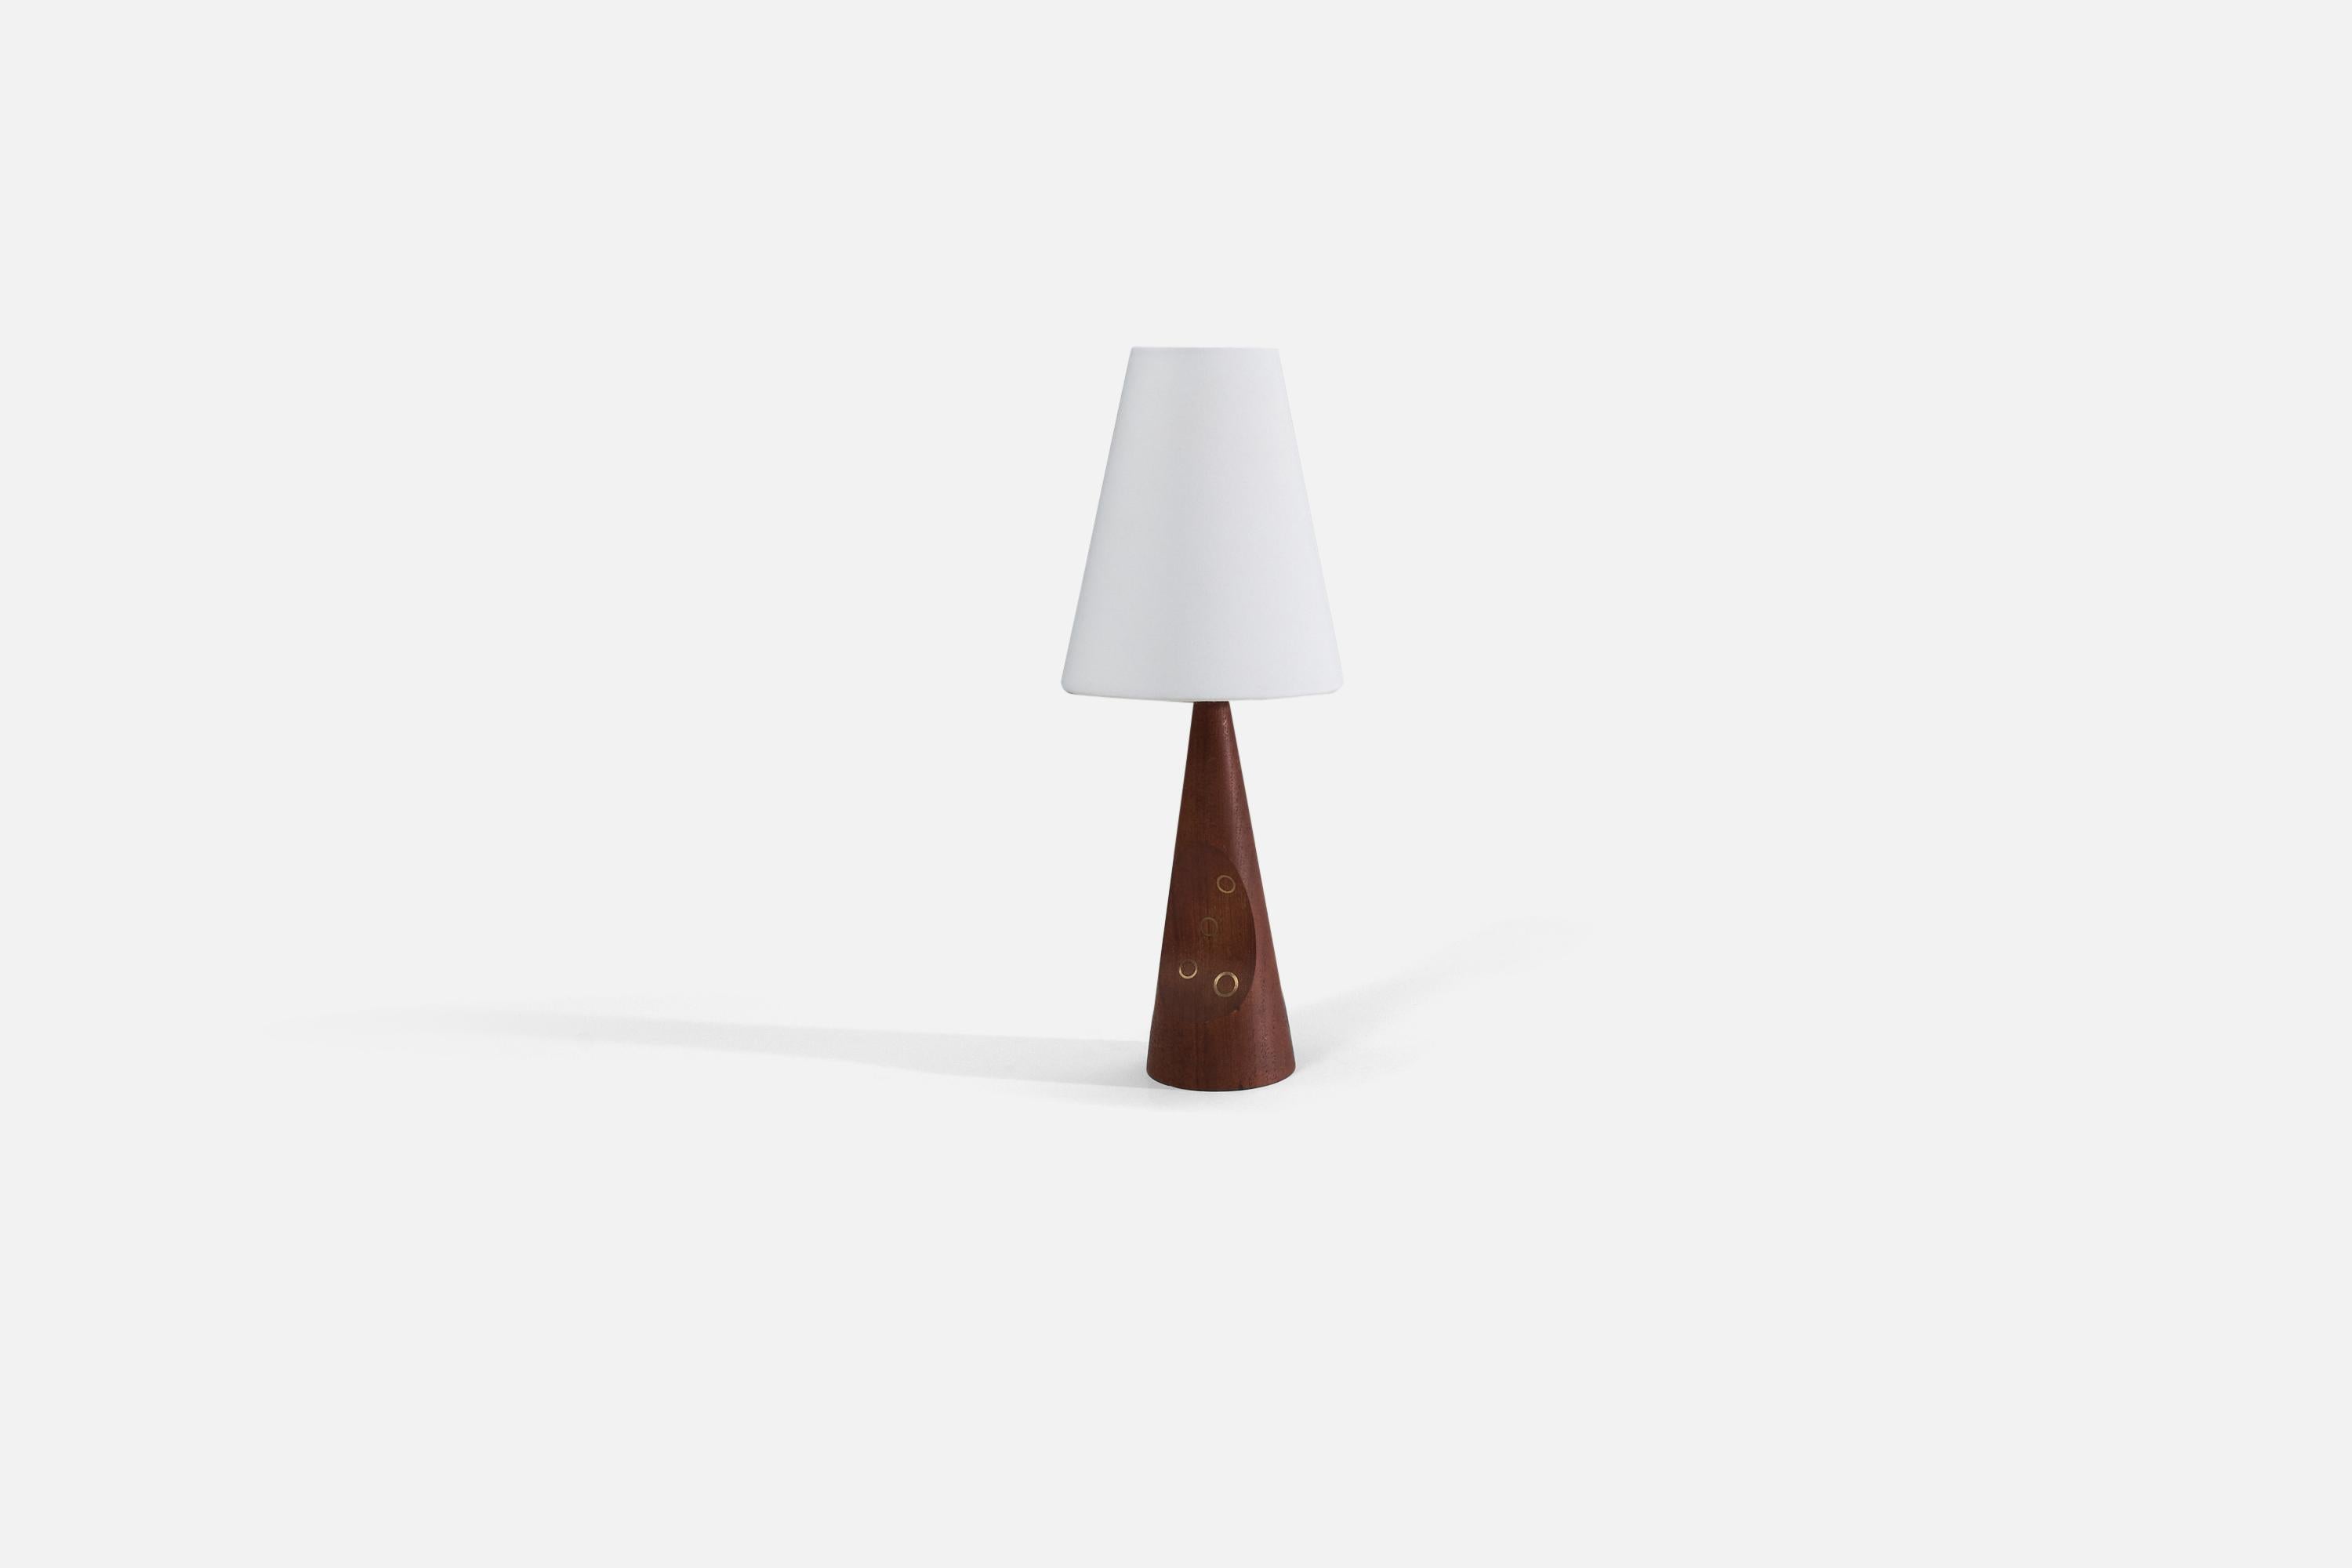 A solid teak and brass table lamp, produced in Denmark, 1950s.

Measurements listed are of lamp. Sold without lampshade.

For reference:

Shade : 2.75 x 5.5 x 6.75
Lamp with shade : 14.5 x 5.5 x 5.5.